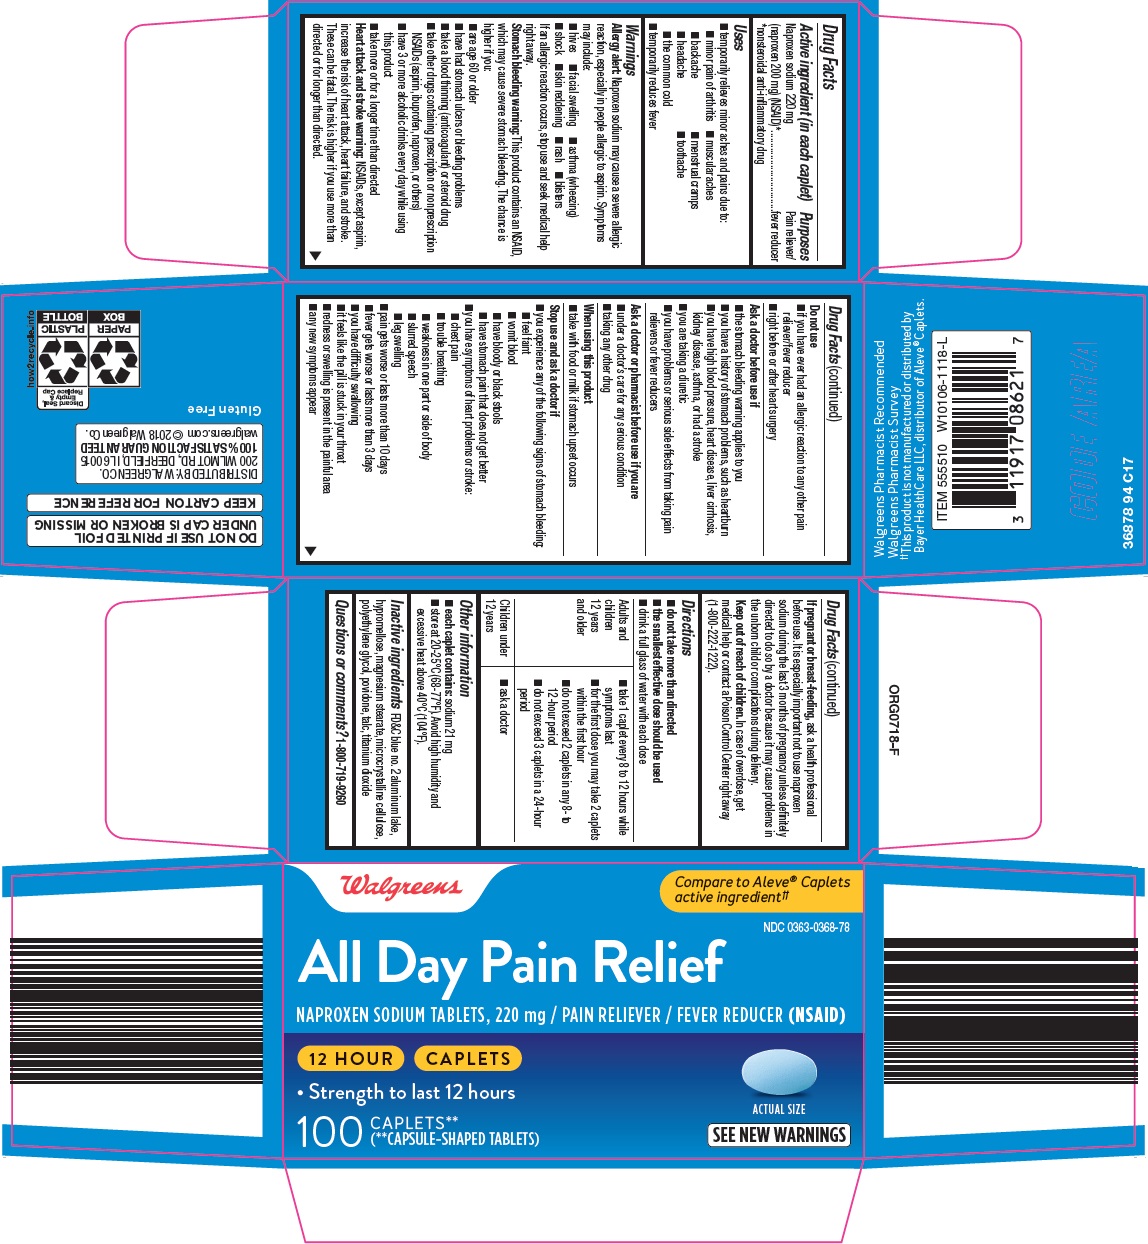 368-94-all-day-pain-relief.jpg